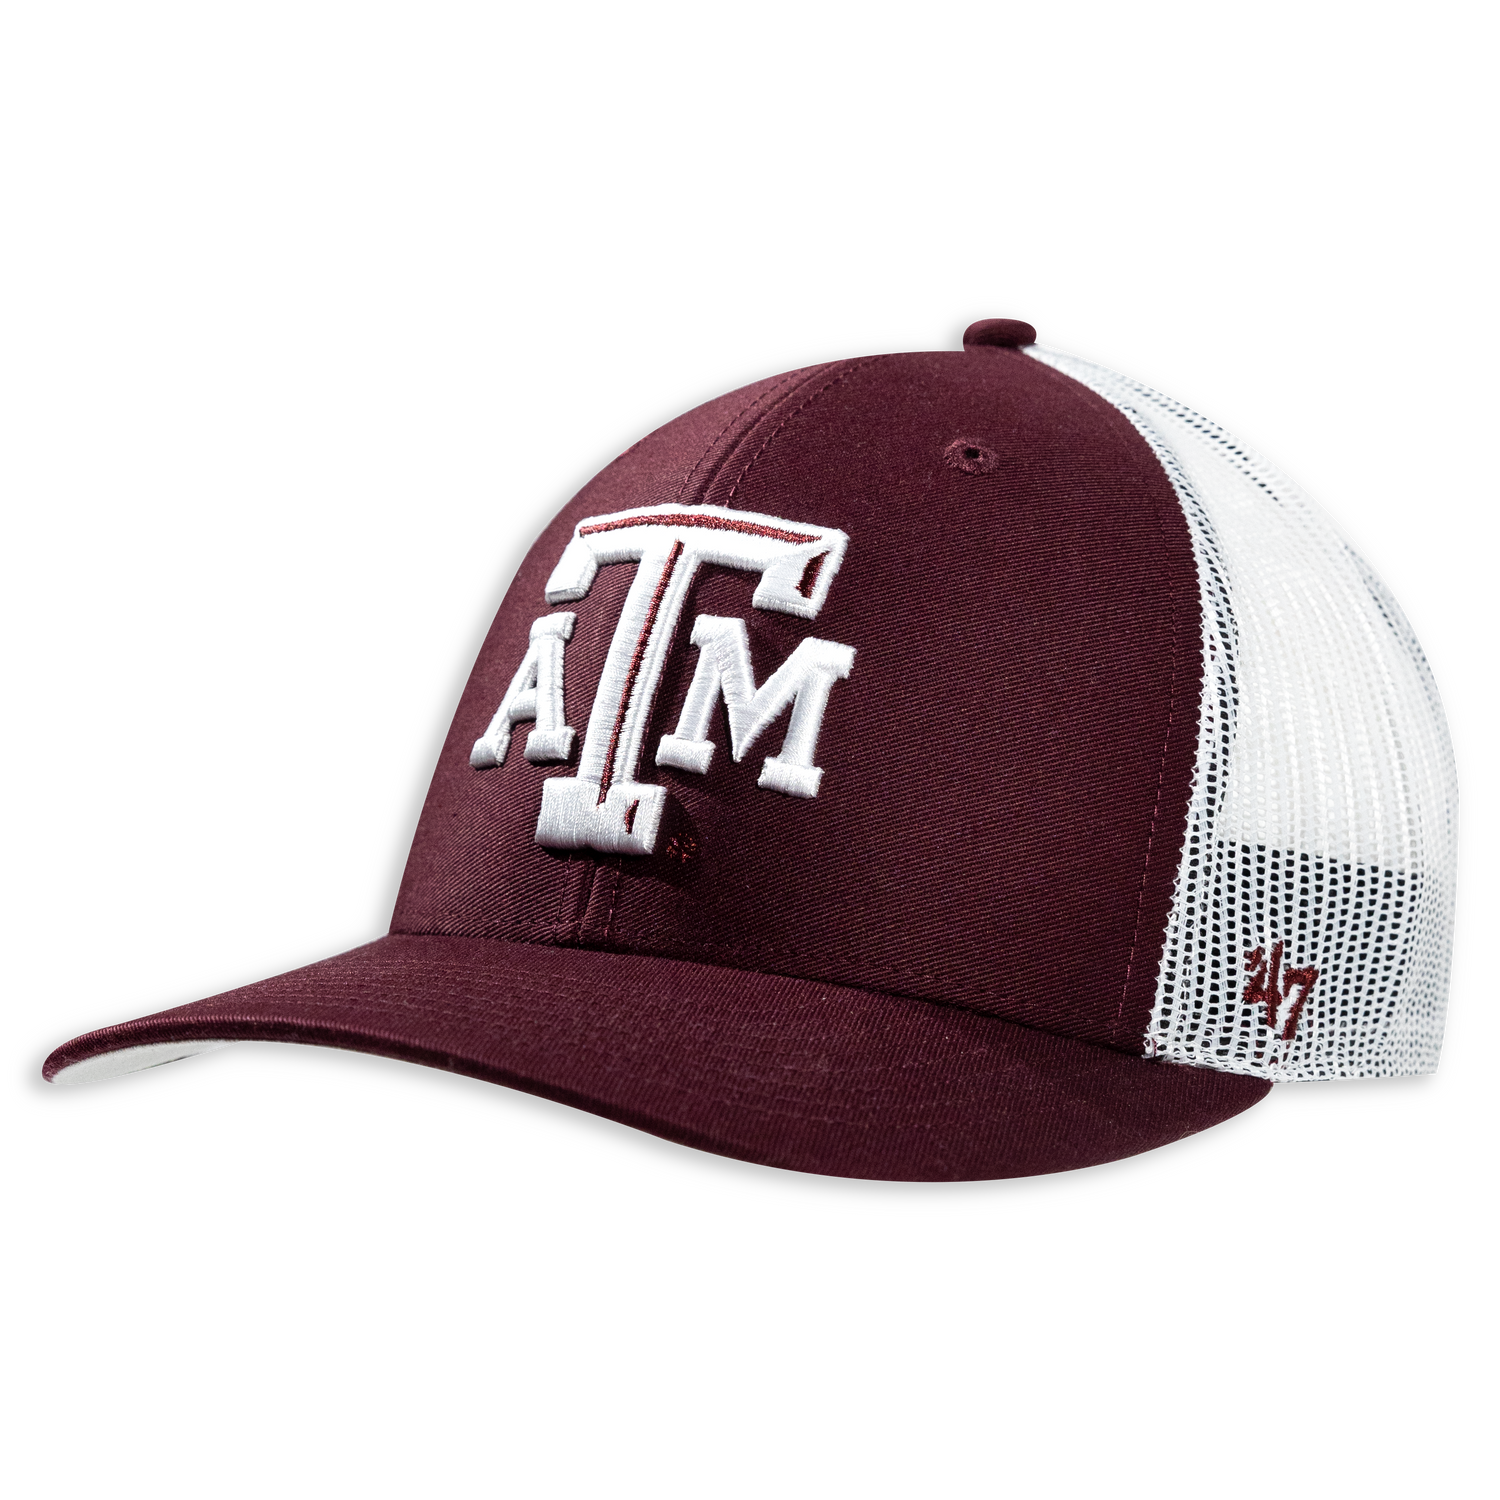 Texas A&M Trucker 47 Maroon With White Mesh Hat